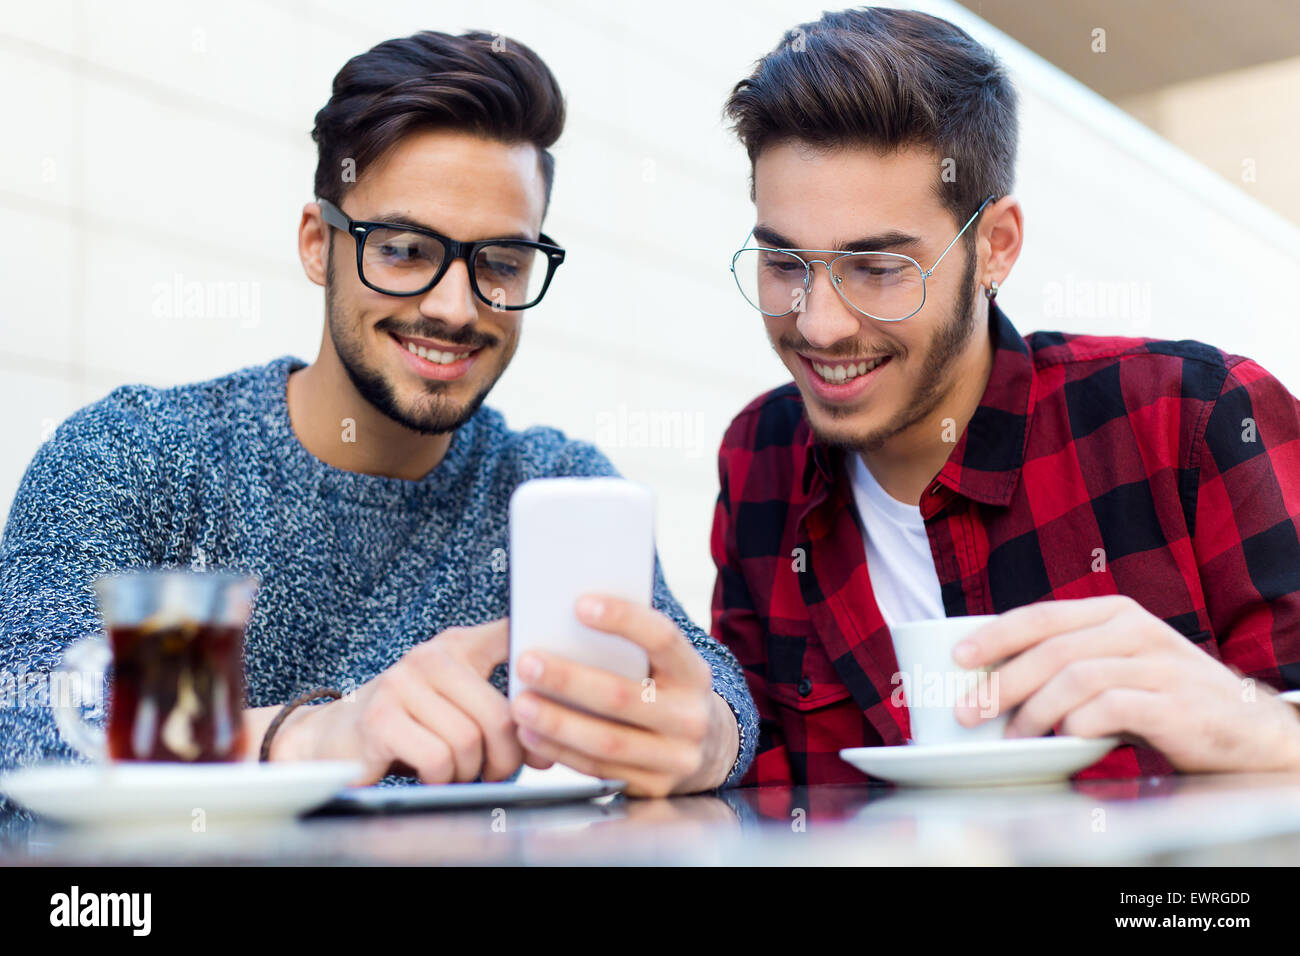 Outdoor portrait of two young entrepreneurs working at coffee shop. Stock Photo